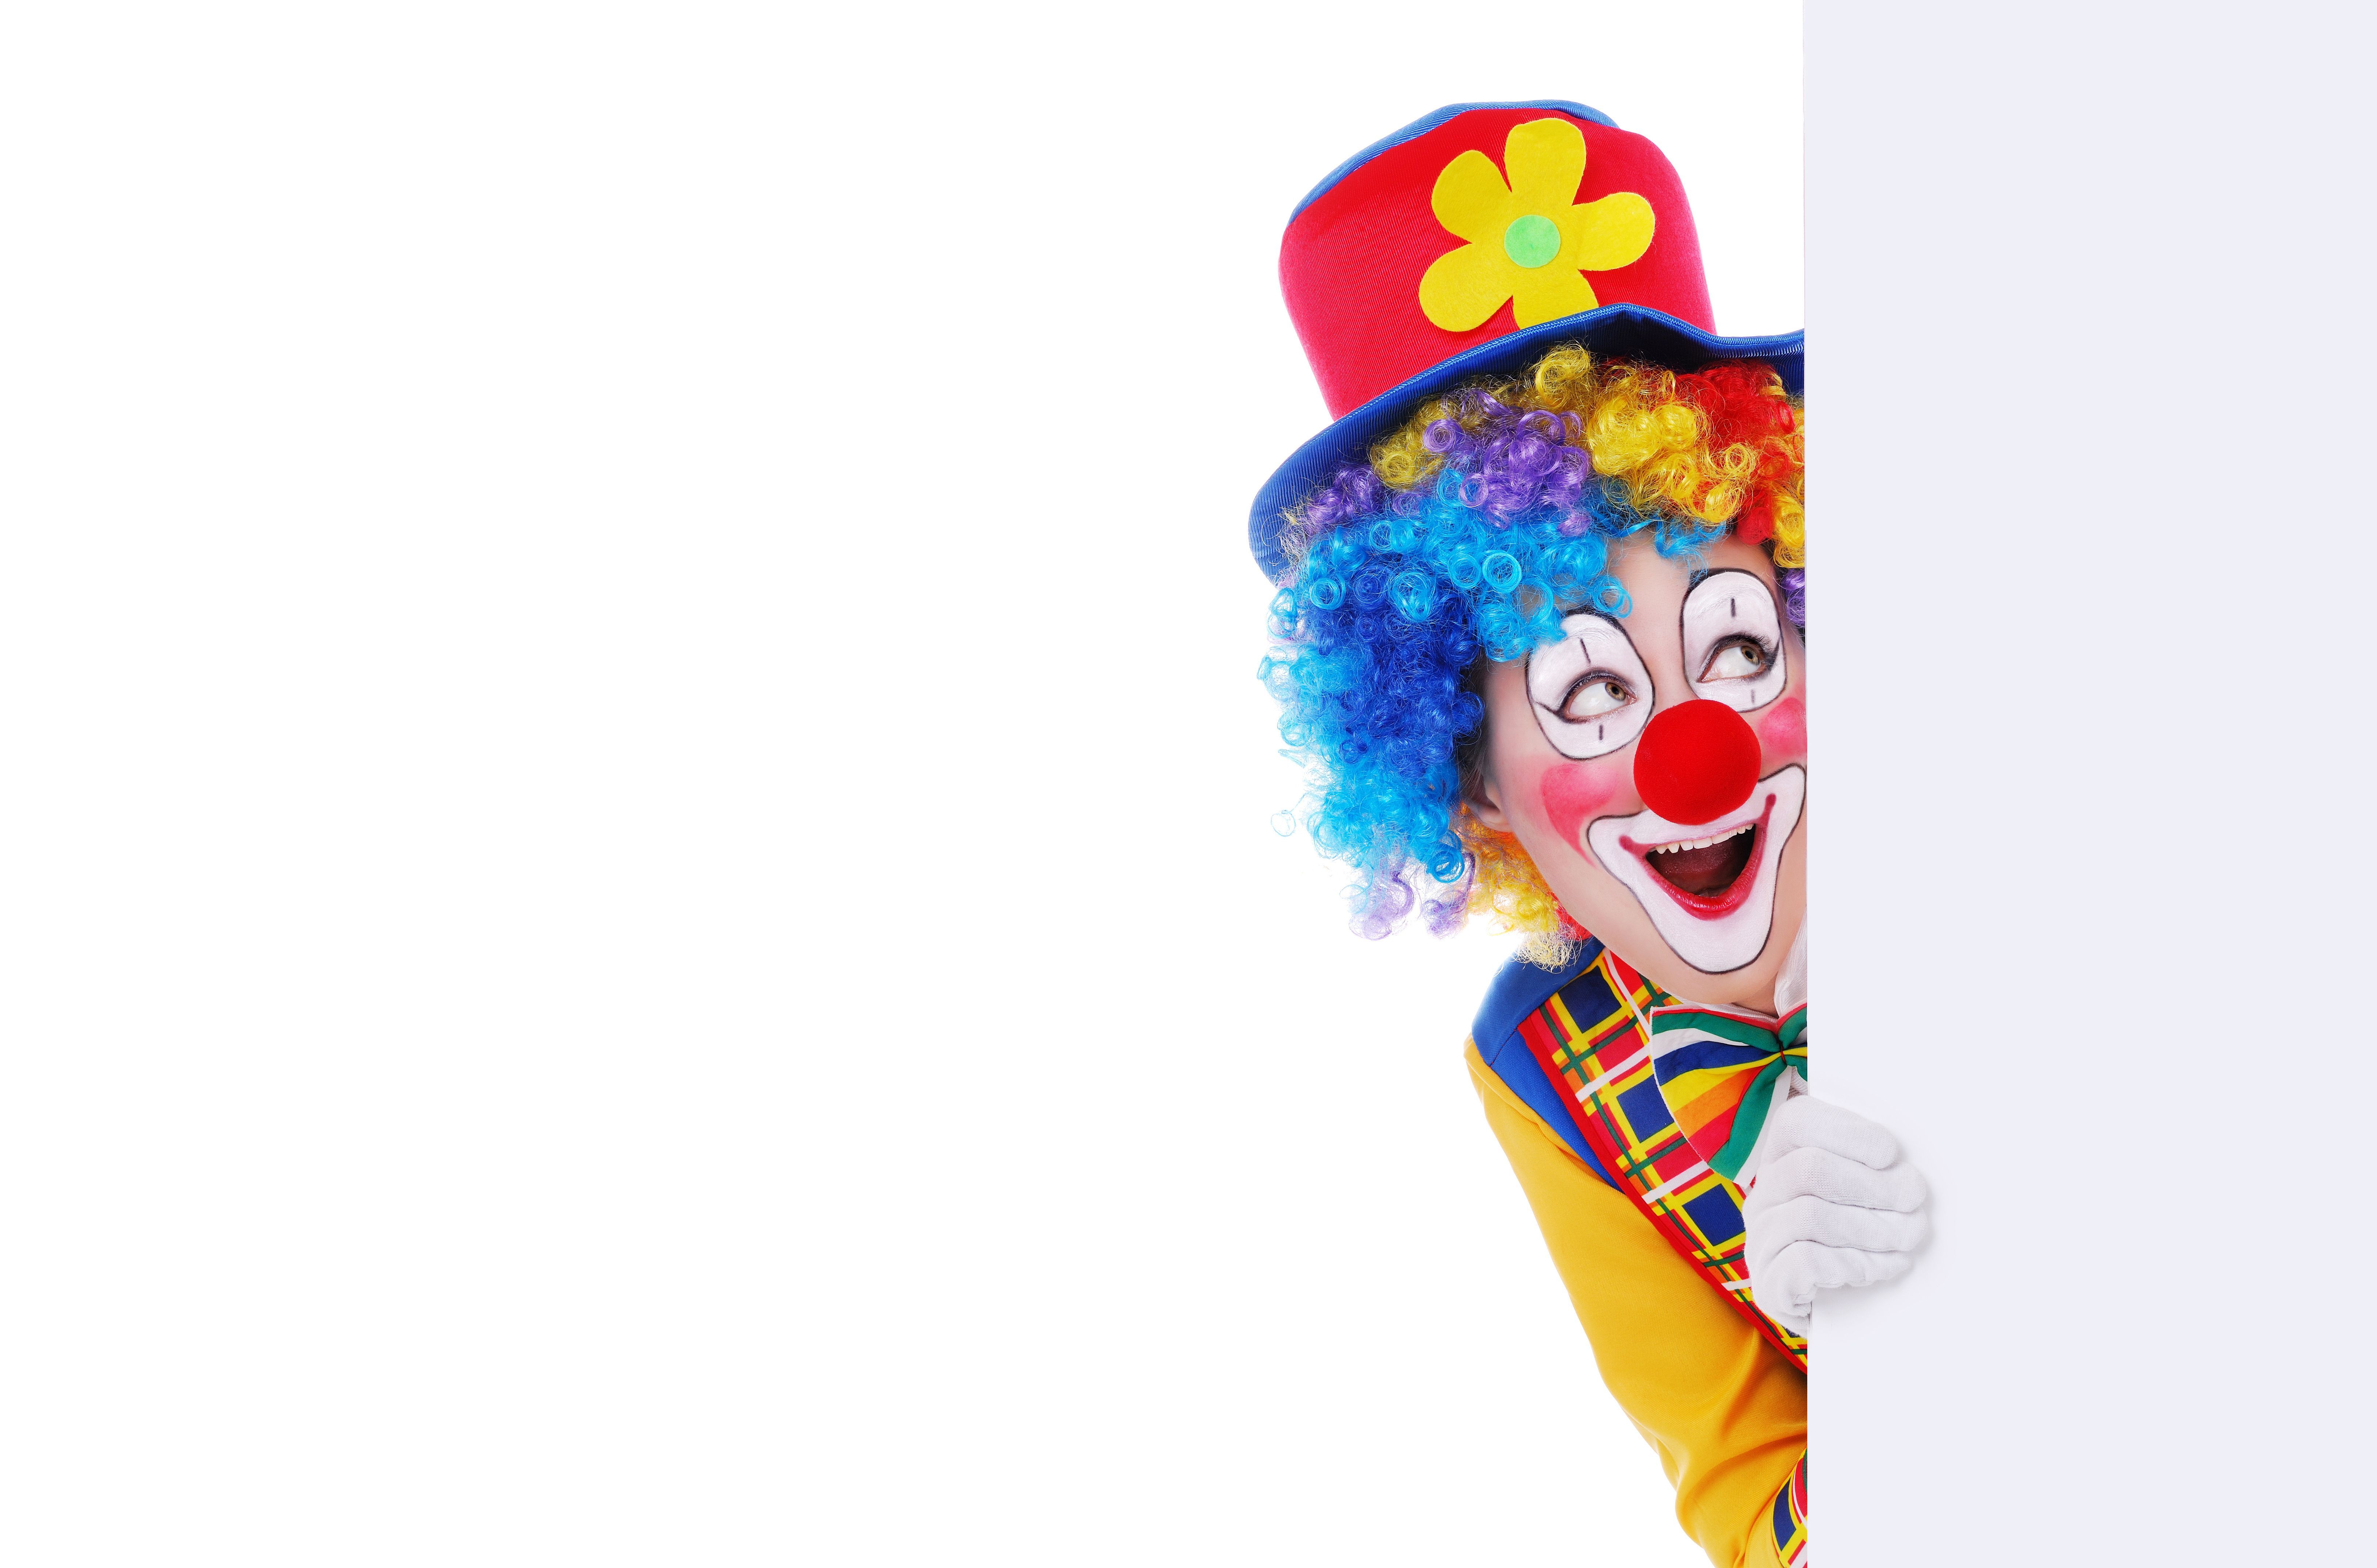 Funny clown wallpaper and image, picture, photo. Joker cartoon, Clown party, Funny joker